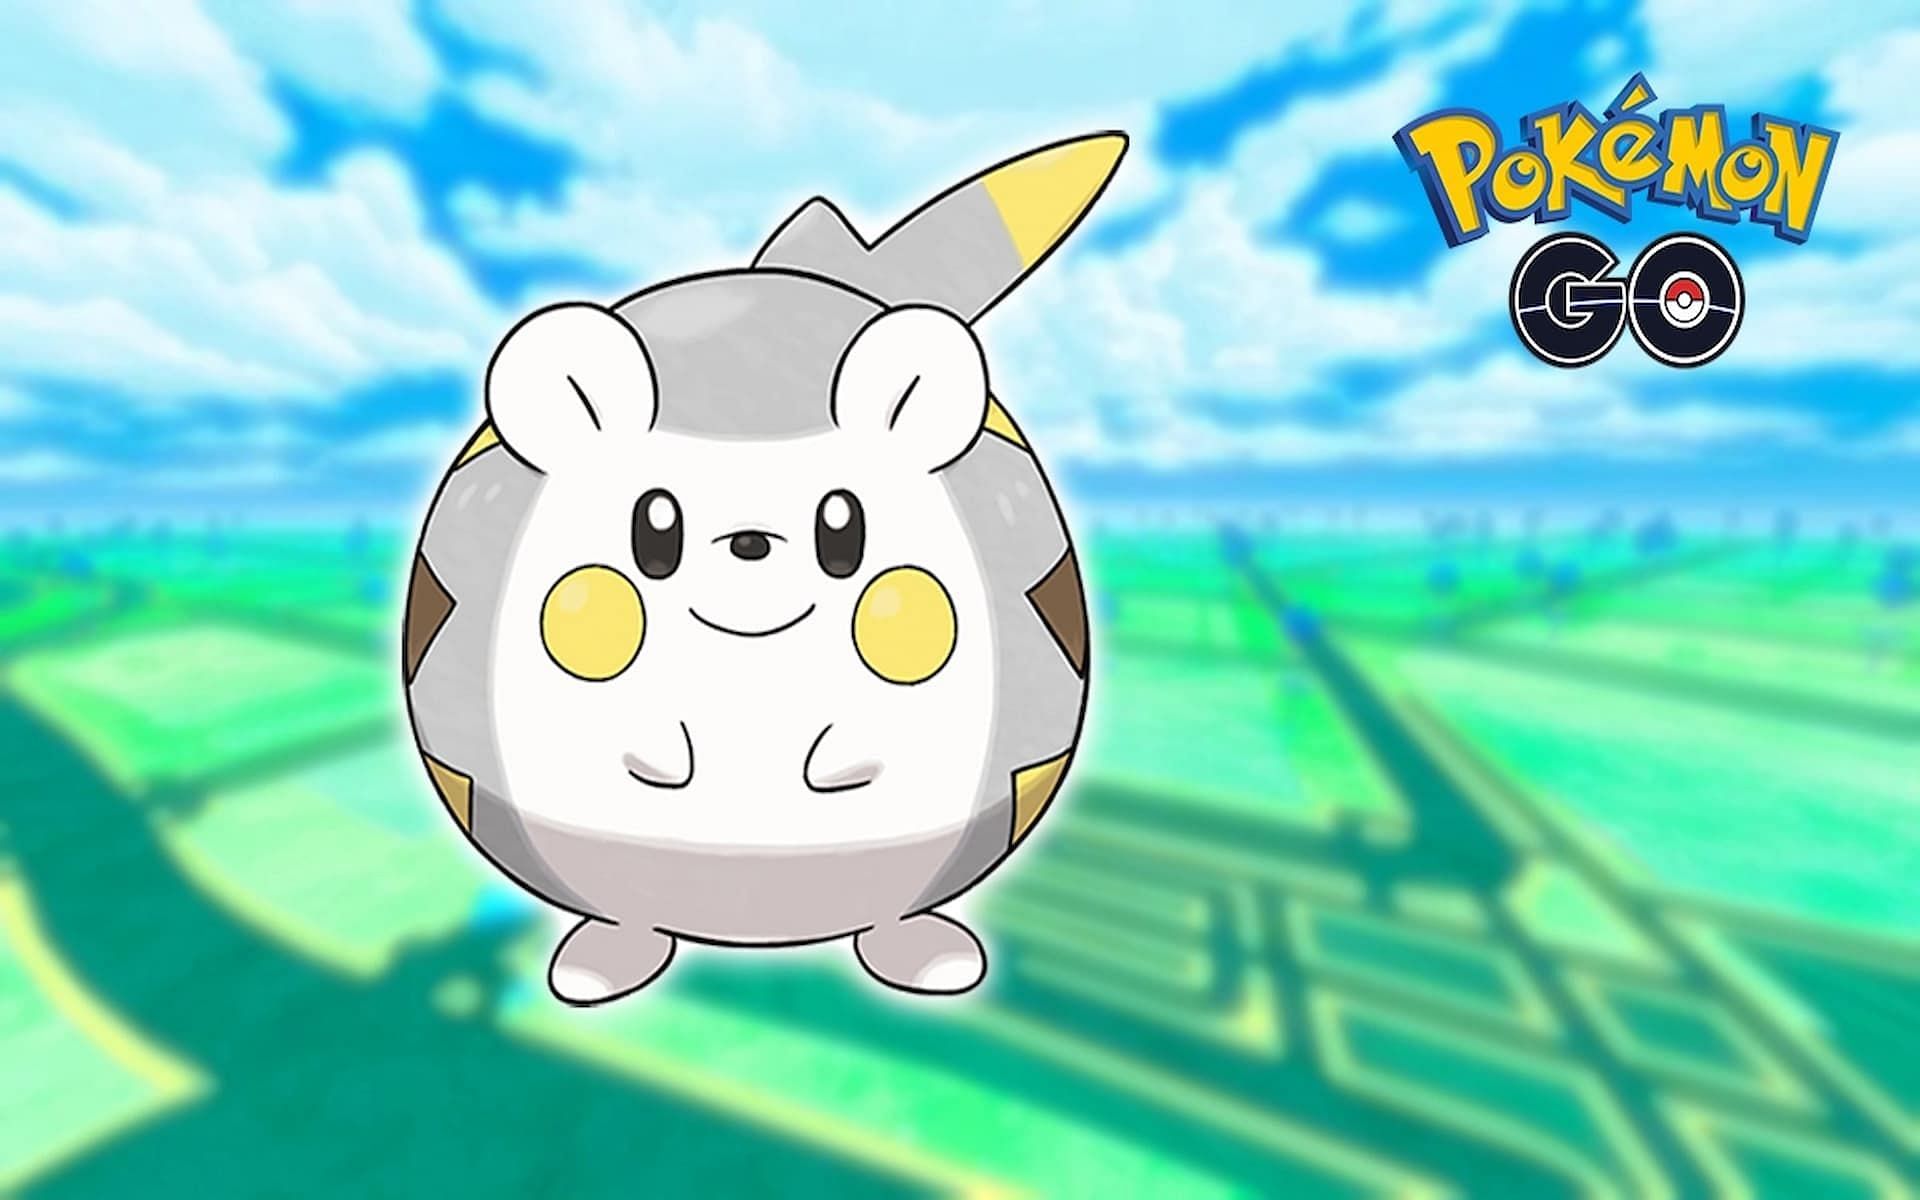 Togedemaru has made its debut in Pokemon GO (Image via Niantic)